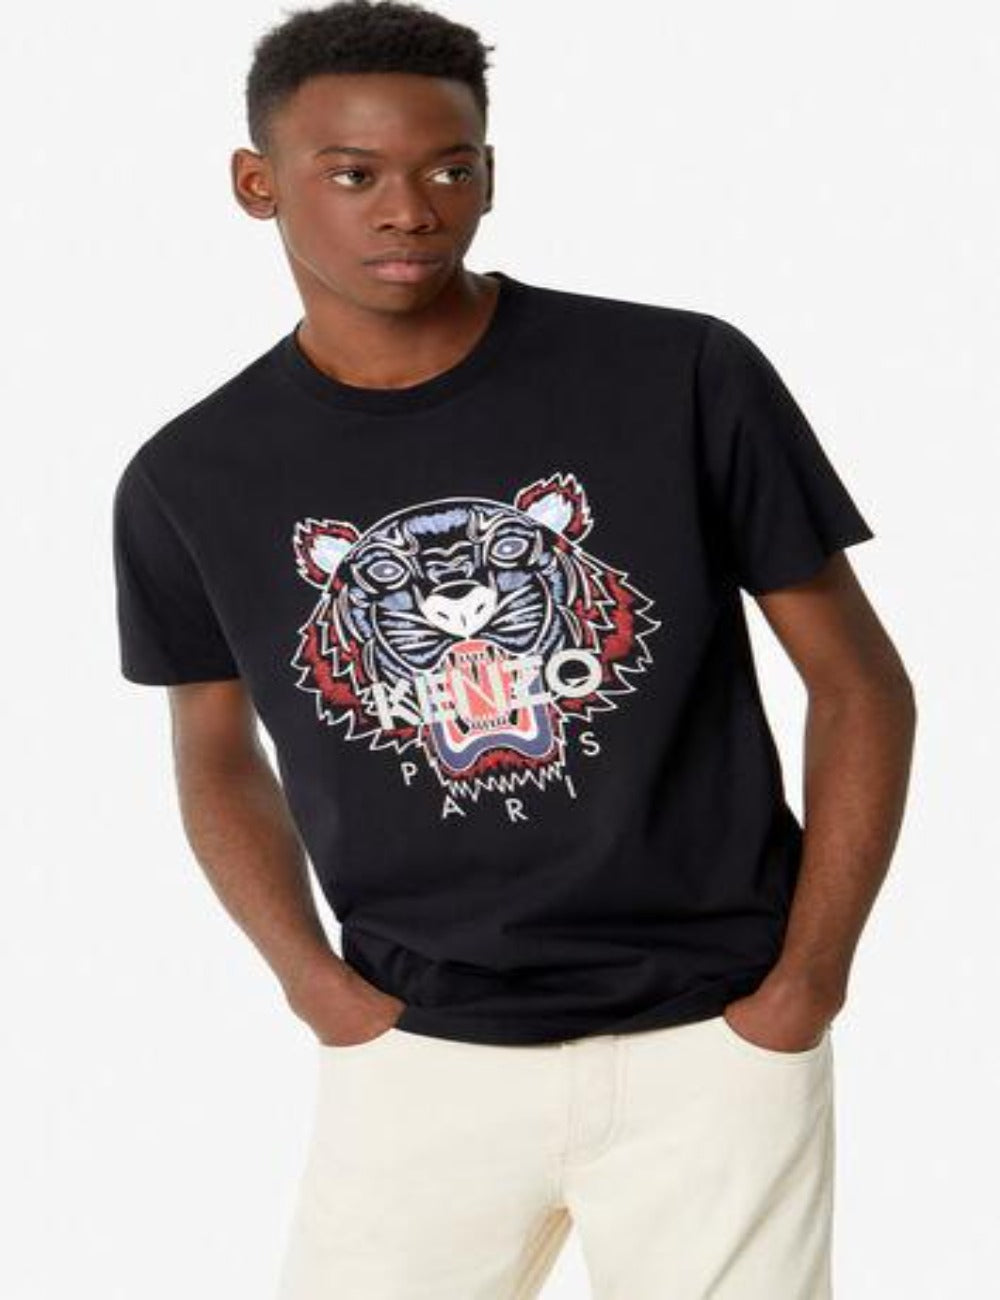 Kenzo Purple Tiger Logo T-Shirt - Shop Streetwear, Sneakers, Slippers and Gifts online | Malaysia - The Factory KL